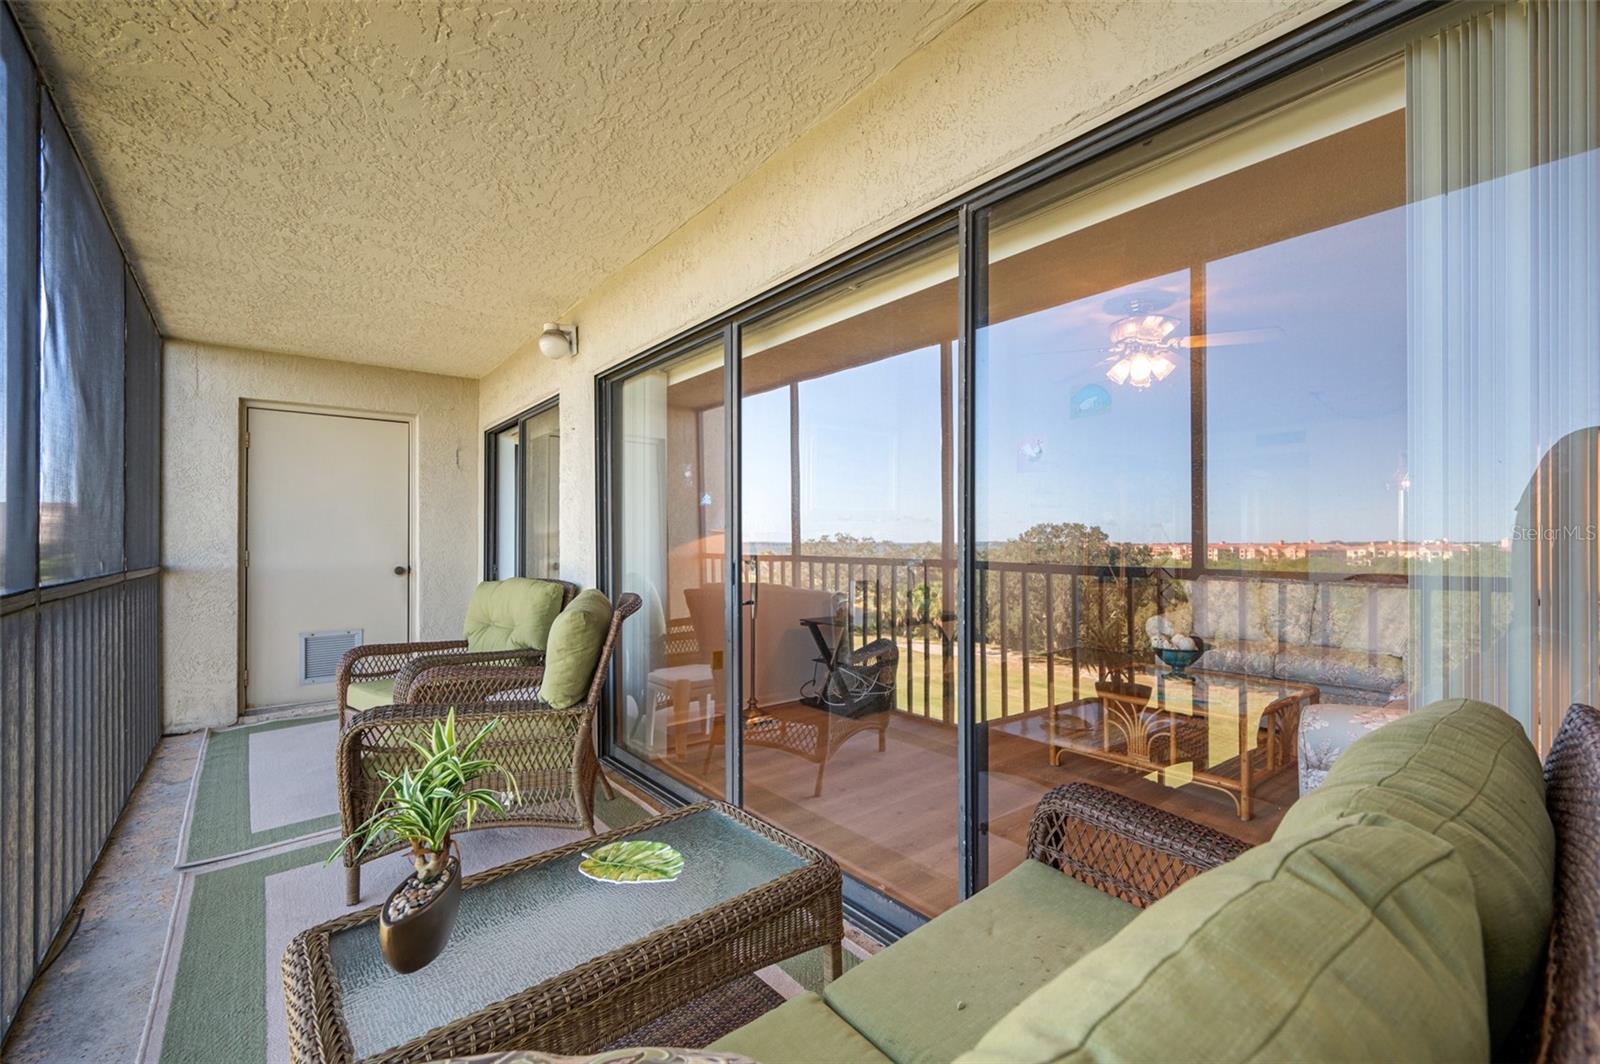 Direct access to lanai from living area.